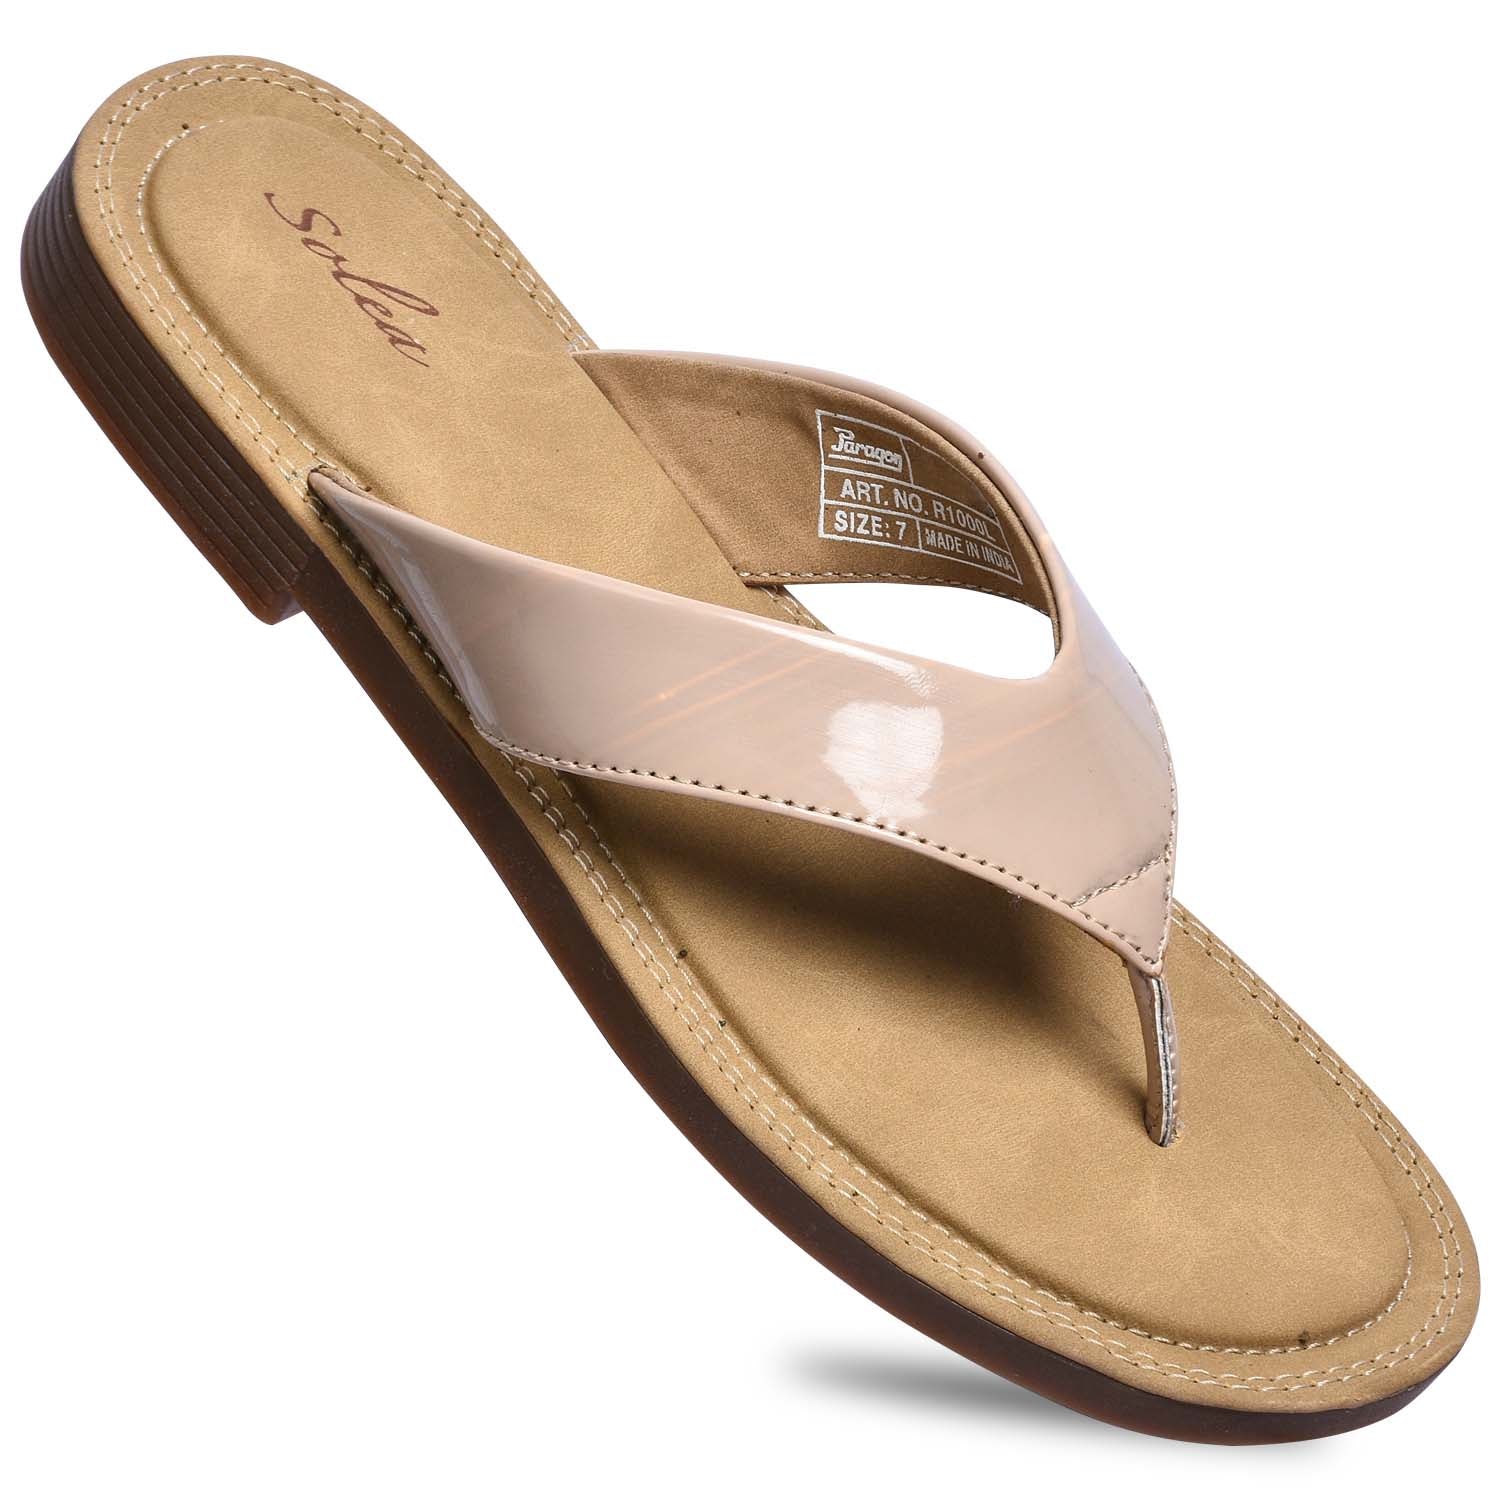 Paragon R1000L Women Sandals | Casual &amp; Formal Sandals | Stylish, Comfortable &amp; Durable | For Daily &amp; Occasion Wear